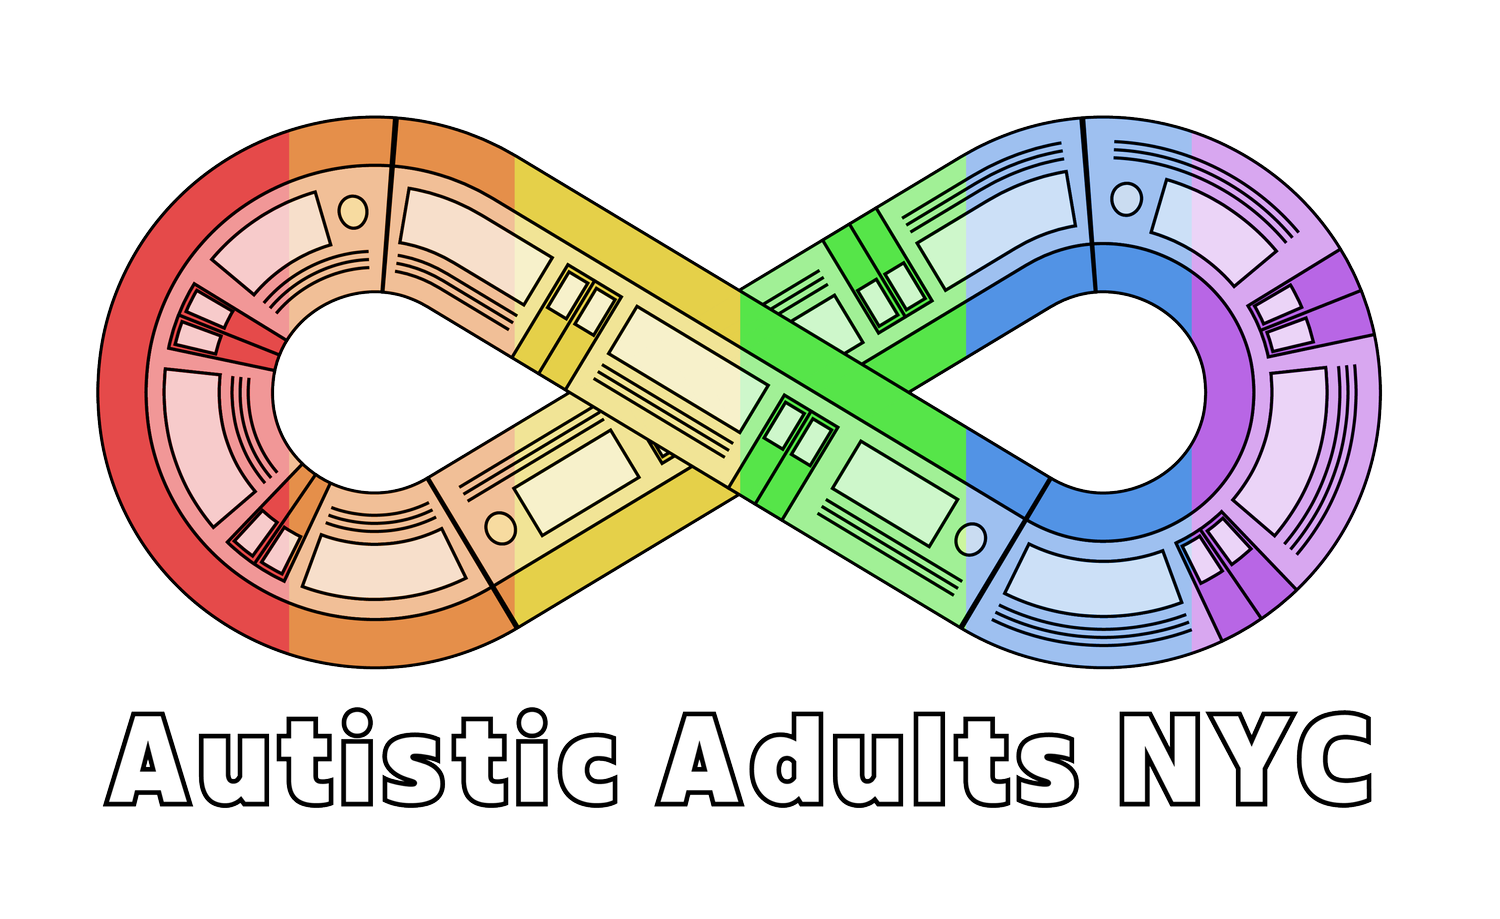 Autistic Adults NYC